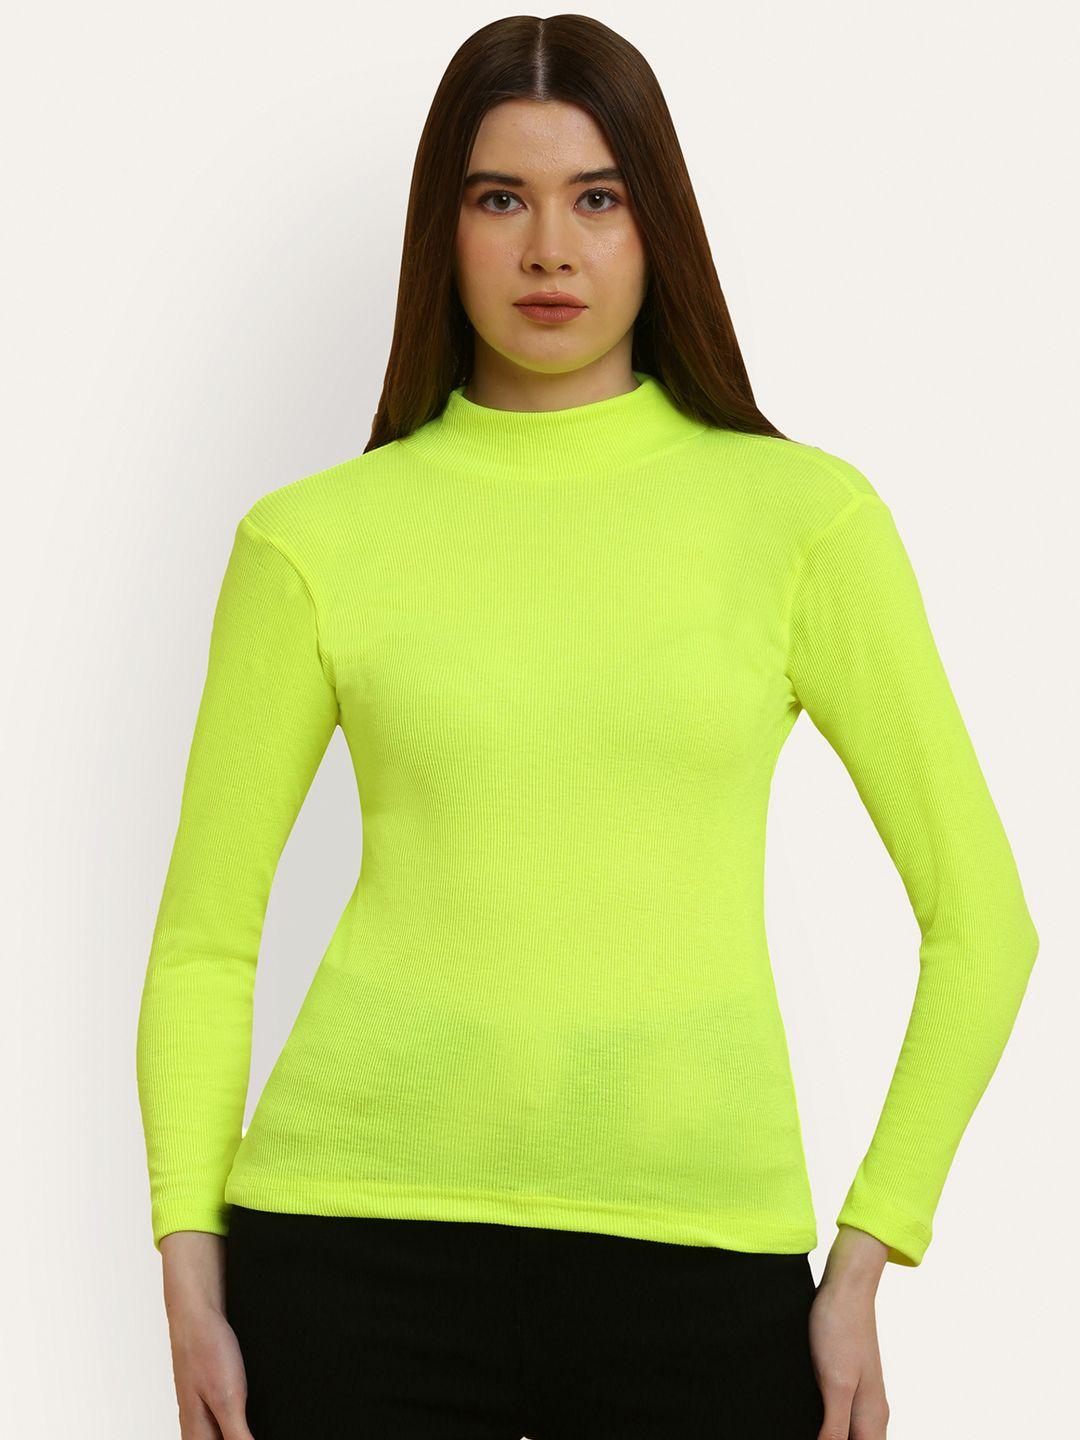 miaz lifestyle high neck long sleeves cotton top